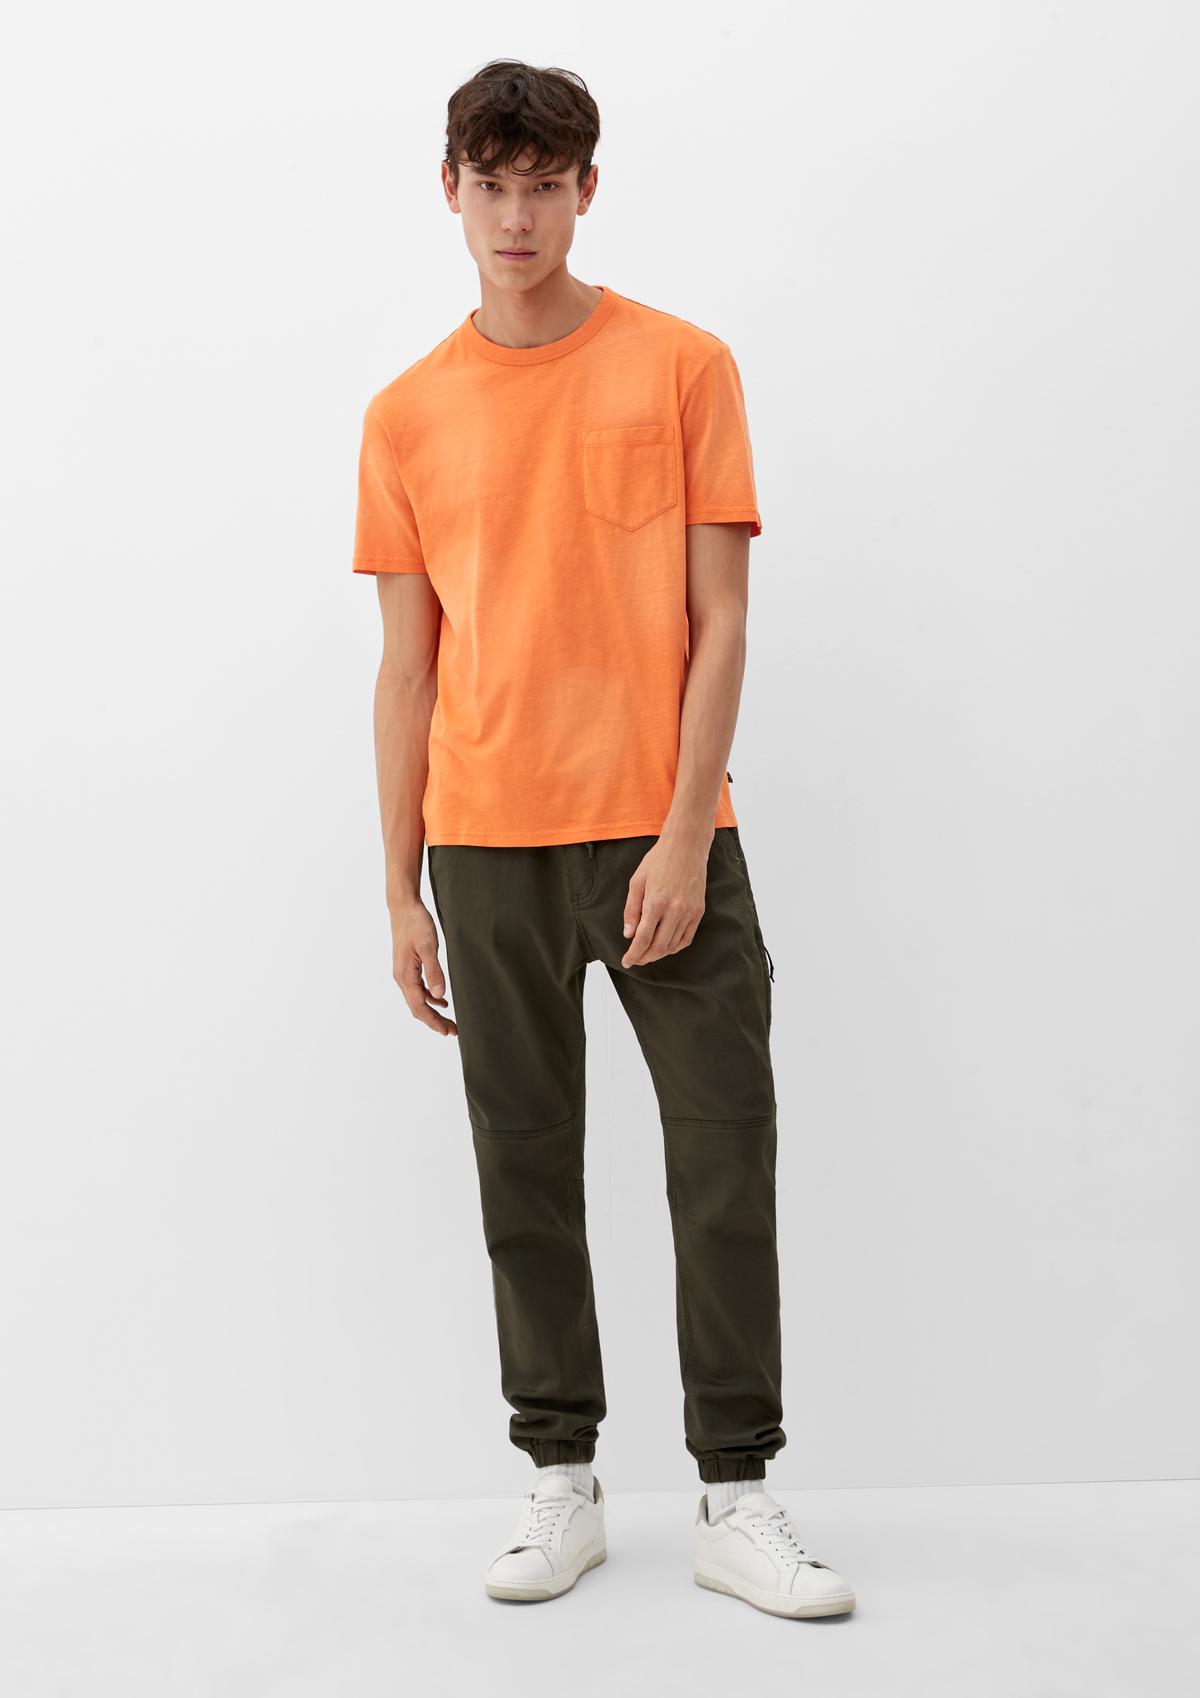 breast with orange - a T-shirt pocket